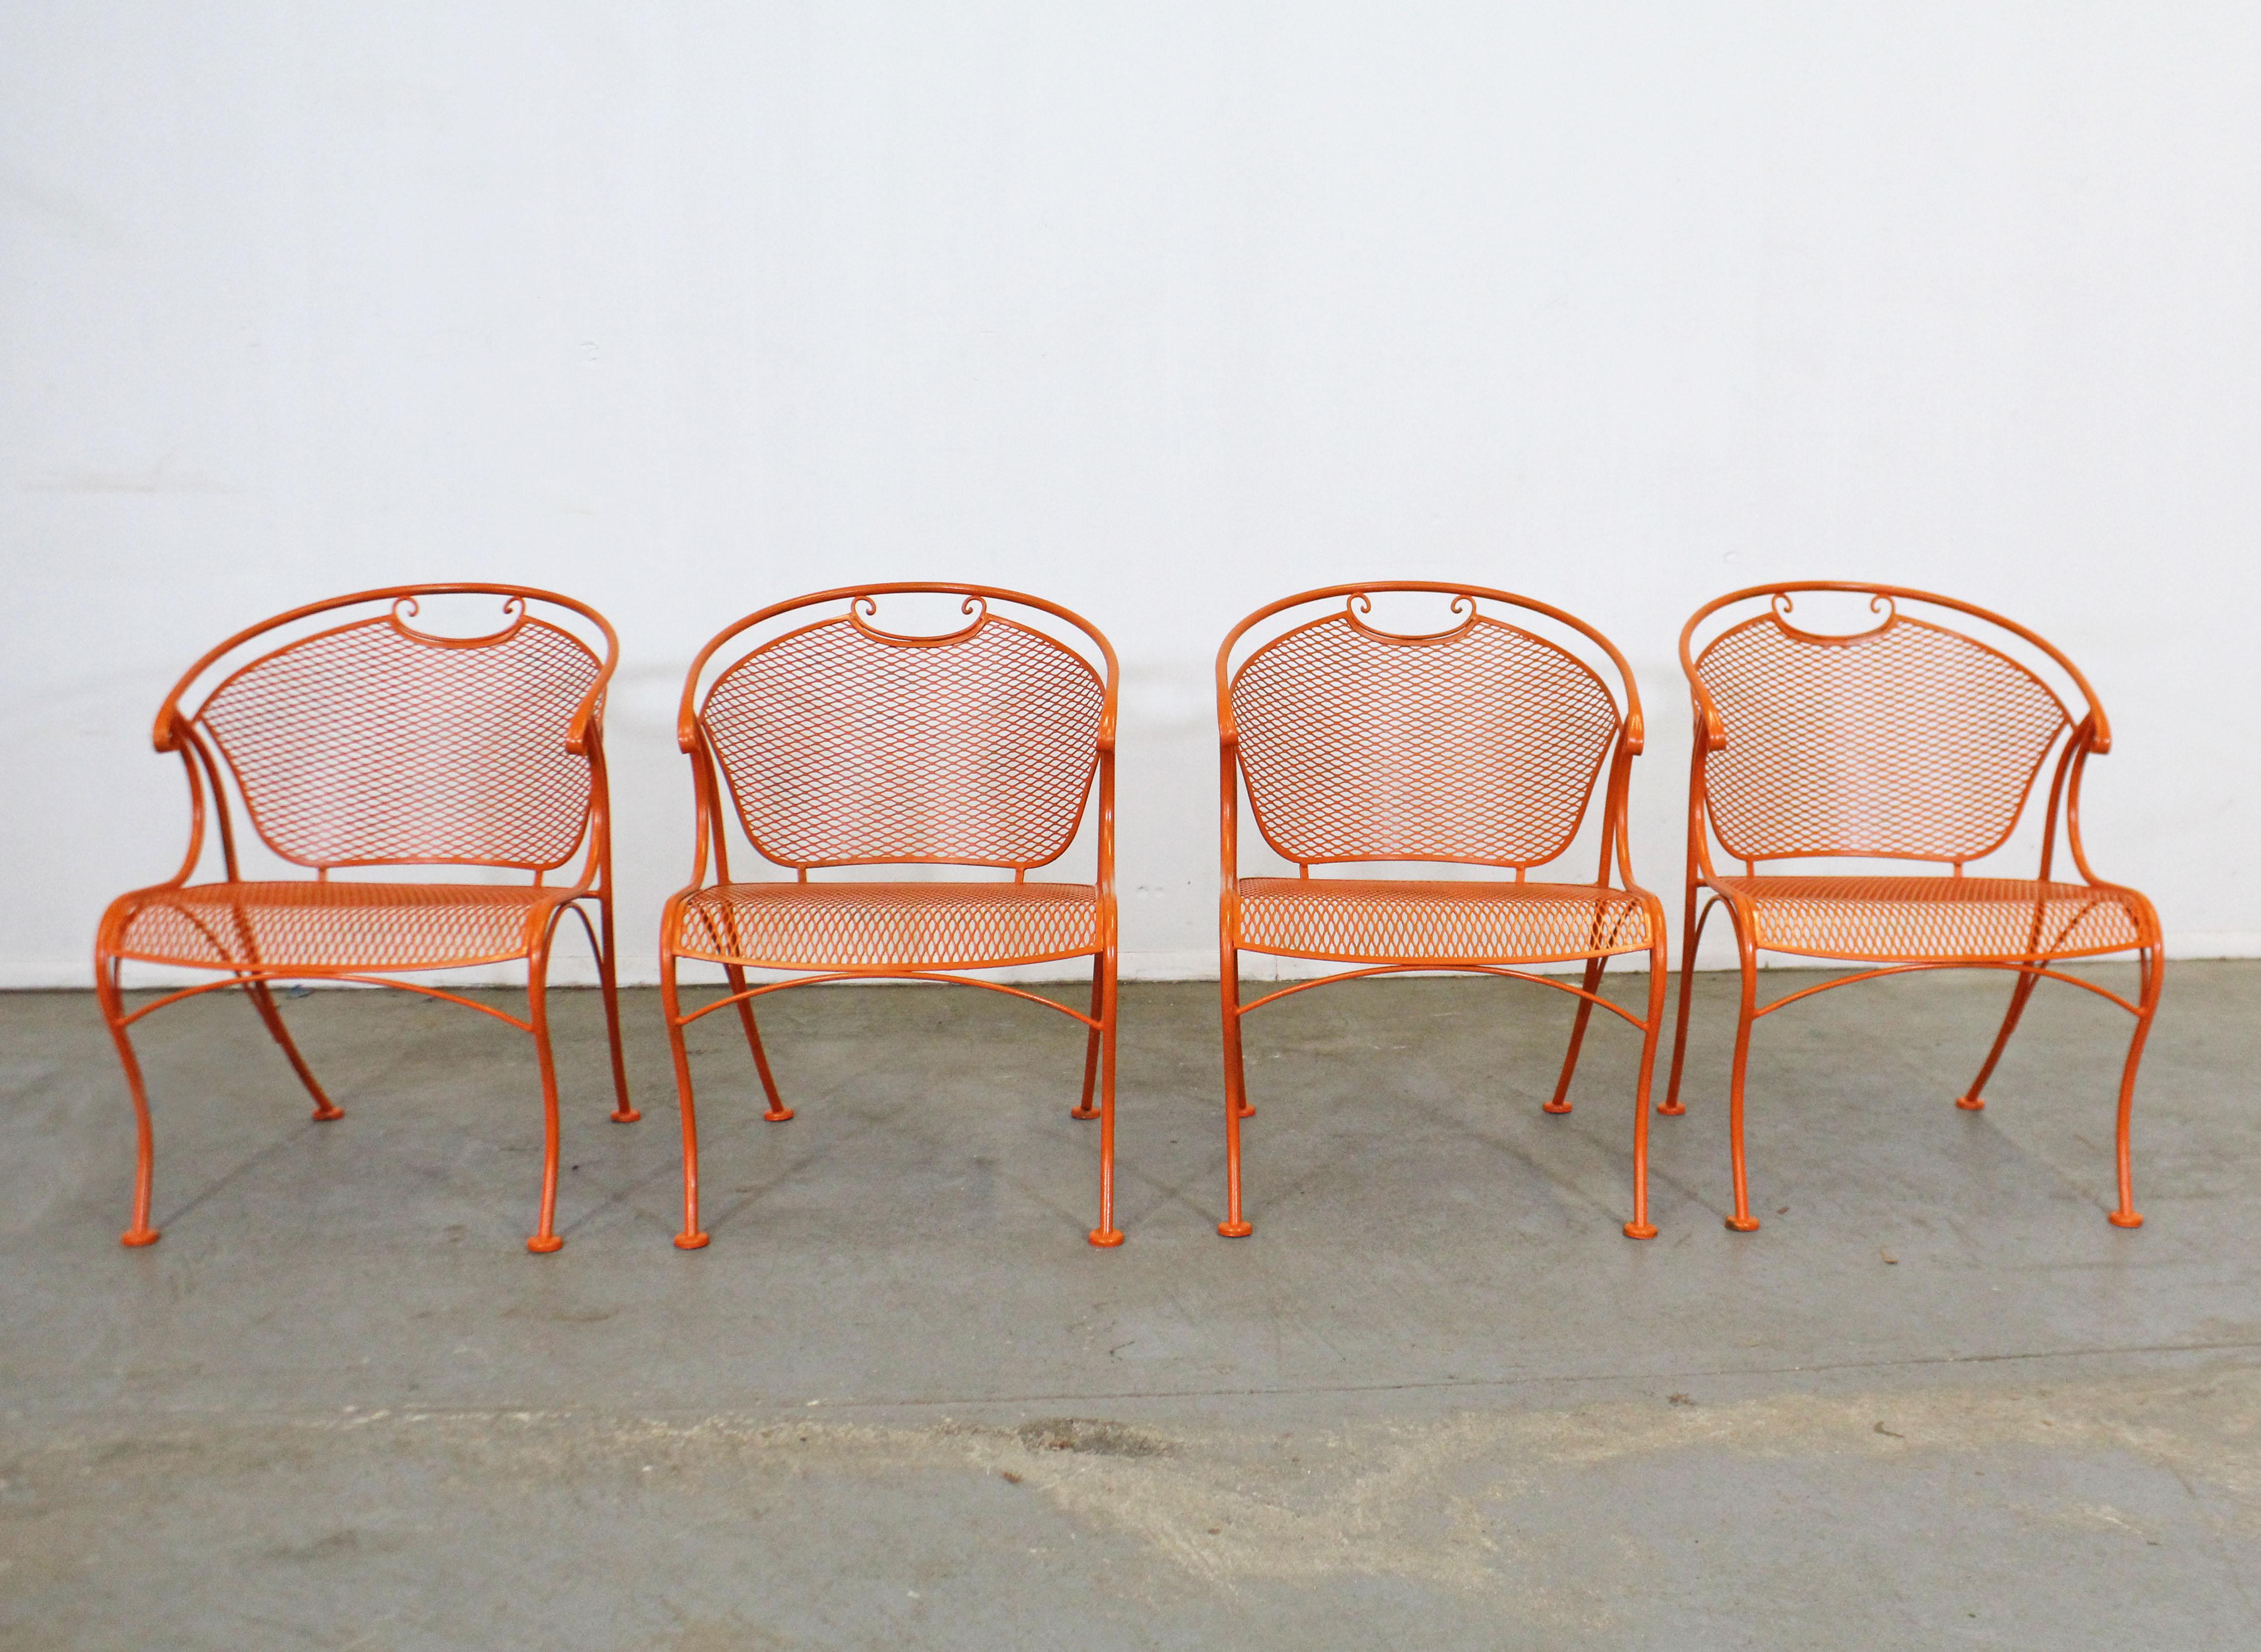 What a find. Offered is a set of 4 vintage iron outdoor armchairs with mesh seats and backs and uniquely curved legs and arms. The chairs are structurally sound, in very good condition and have been repainted orange. They are not